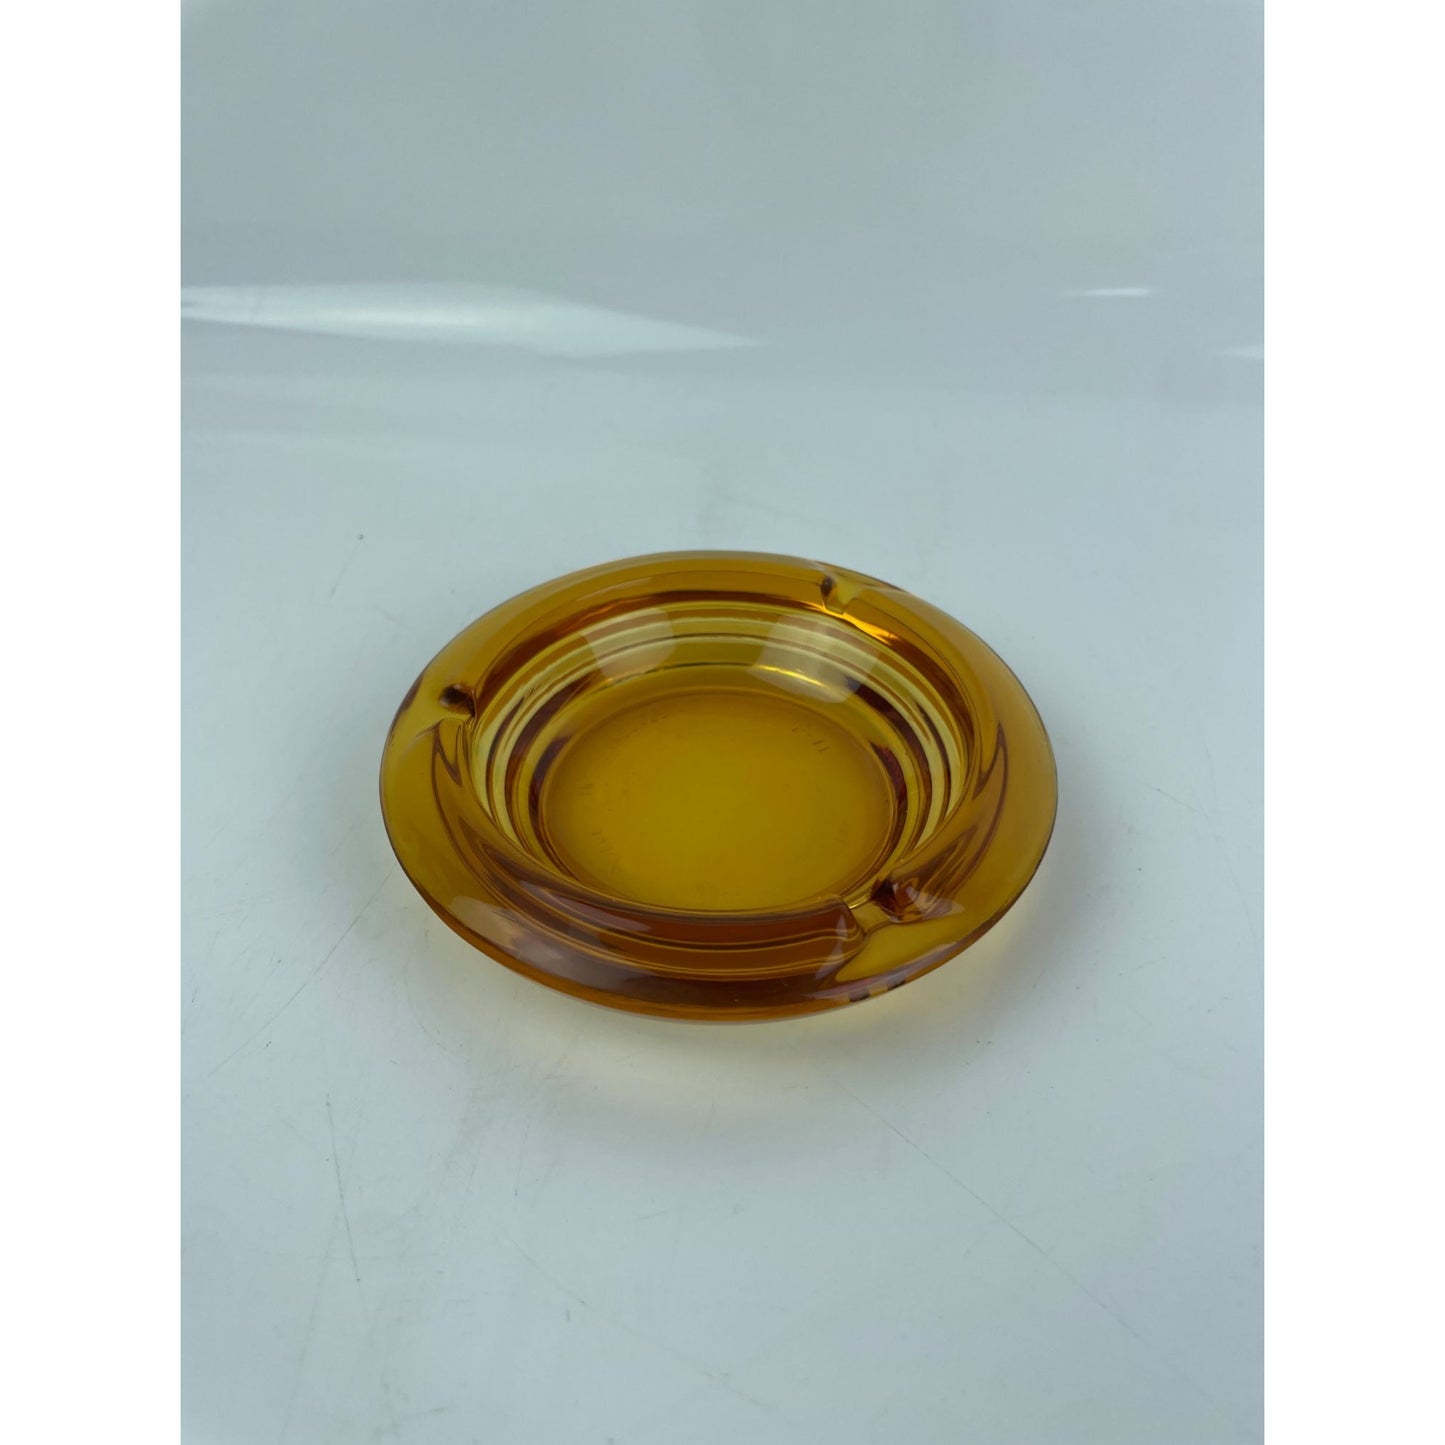 kedaung group made in Indonesia amber glass small ashtray